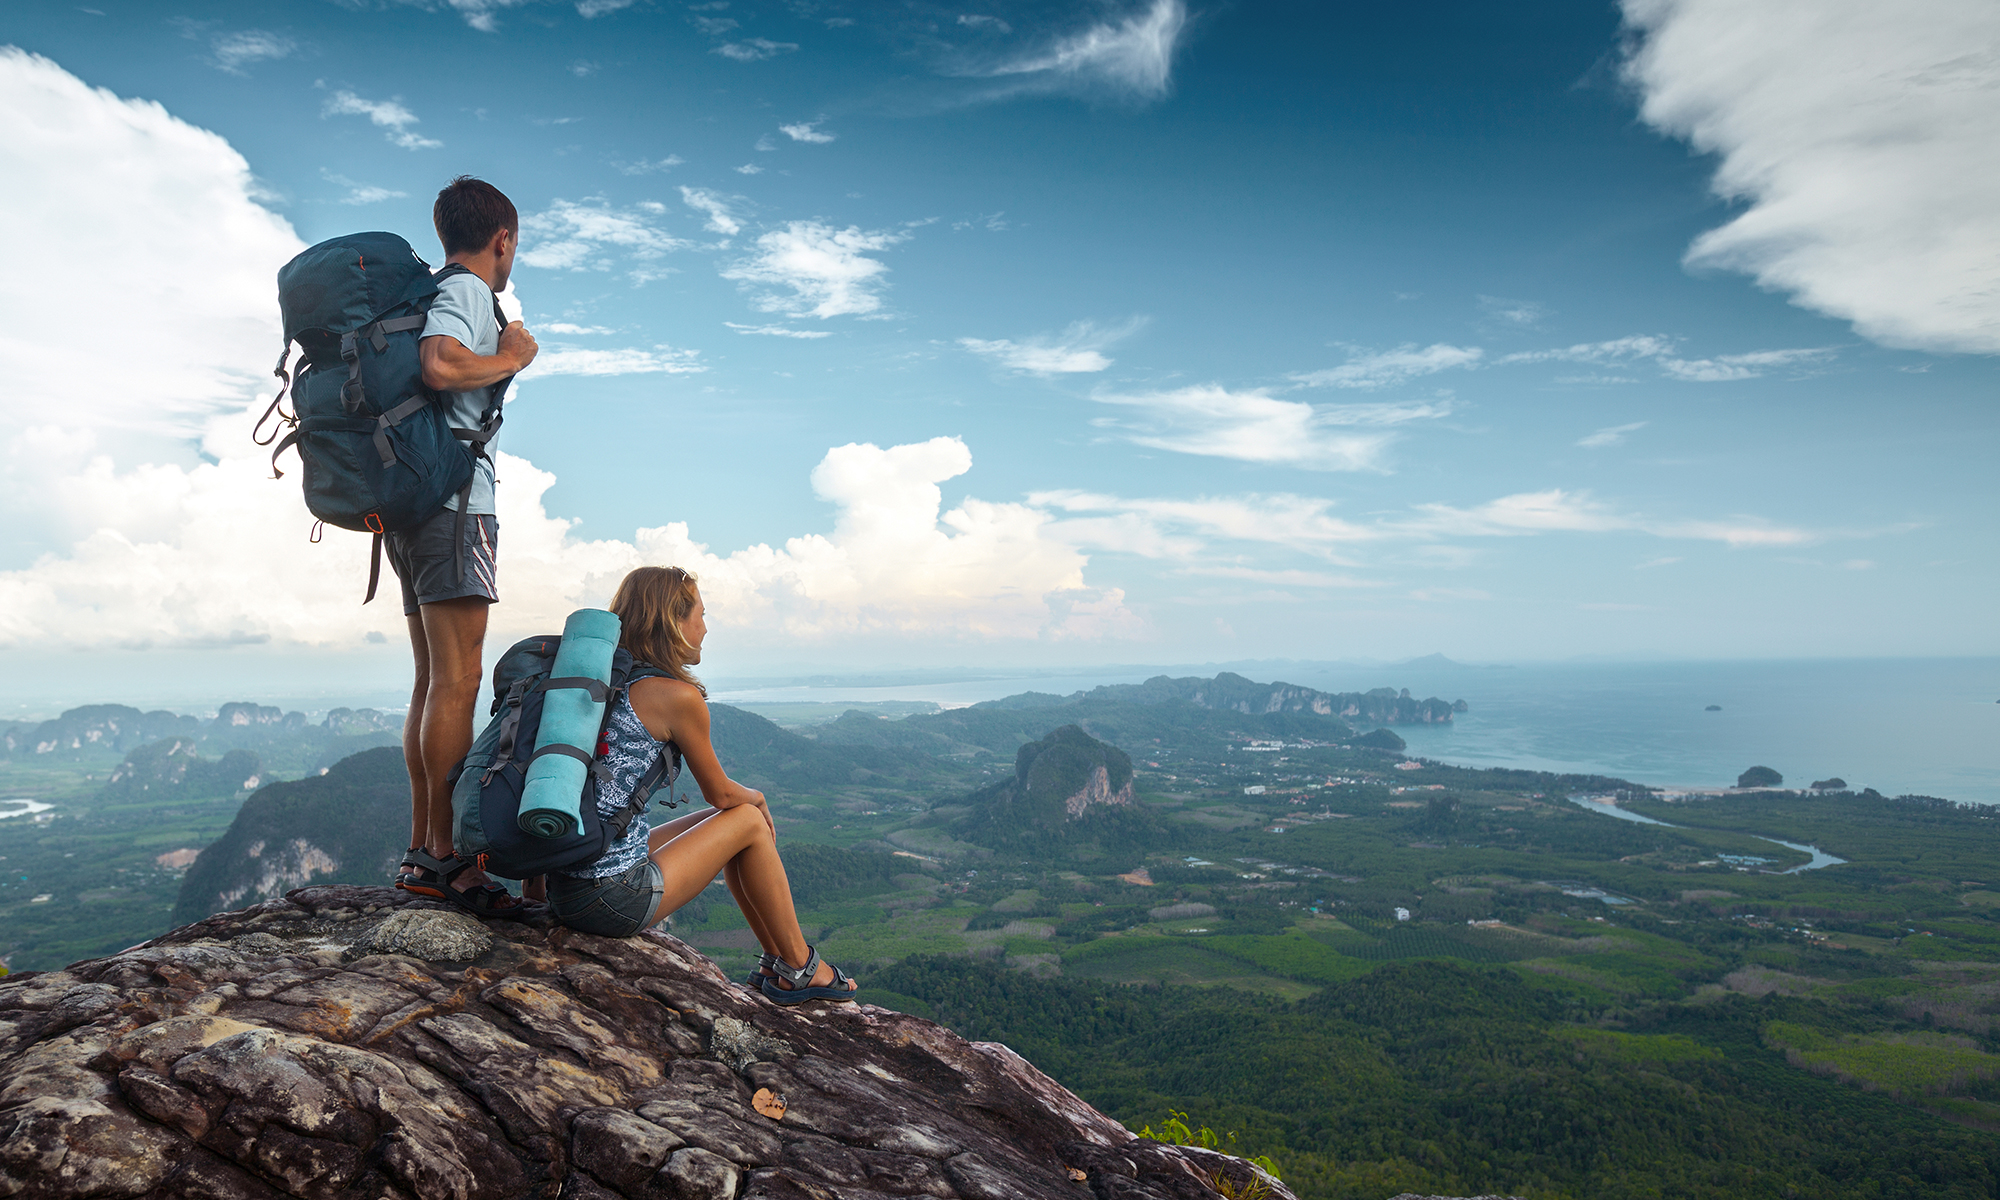 Relaxing or Repelling: What’s on Your Honeymoon Agenda?